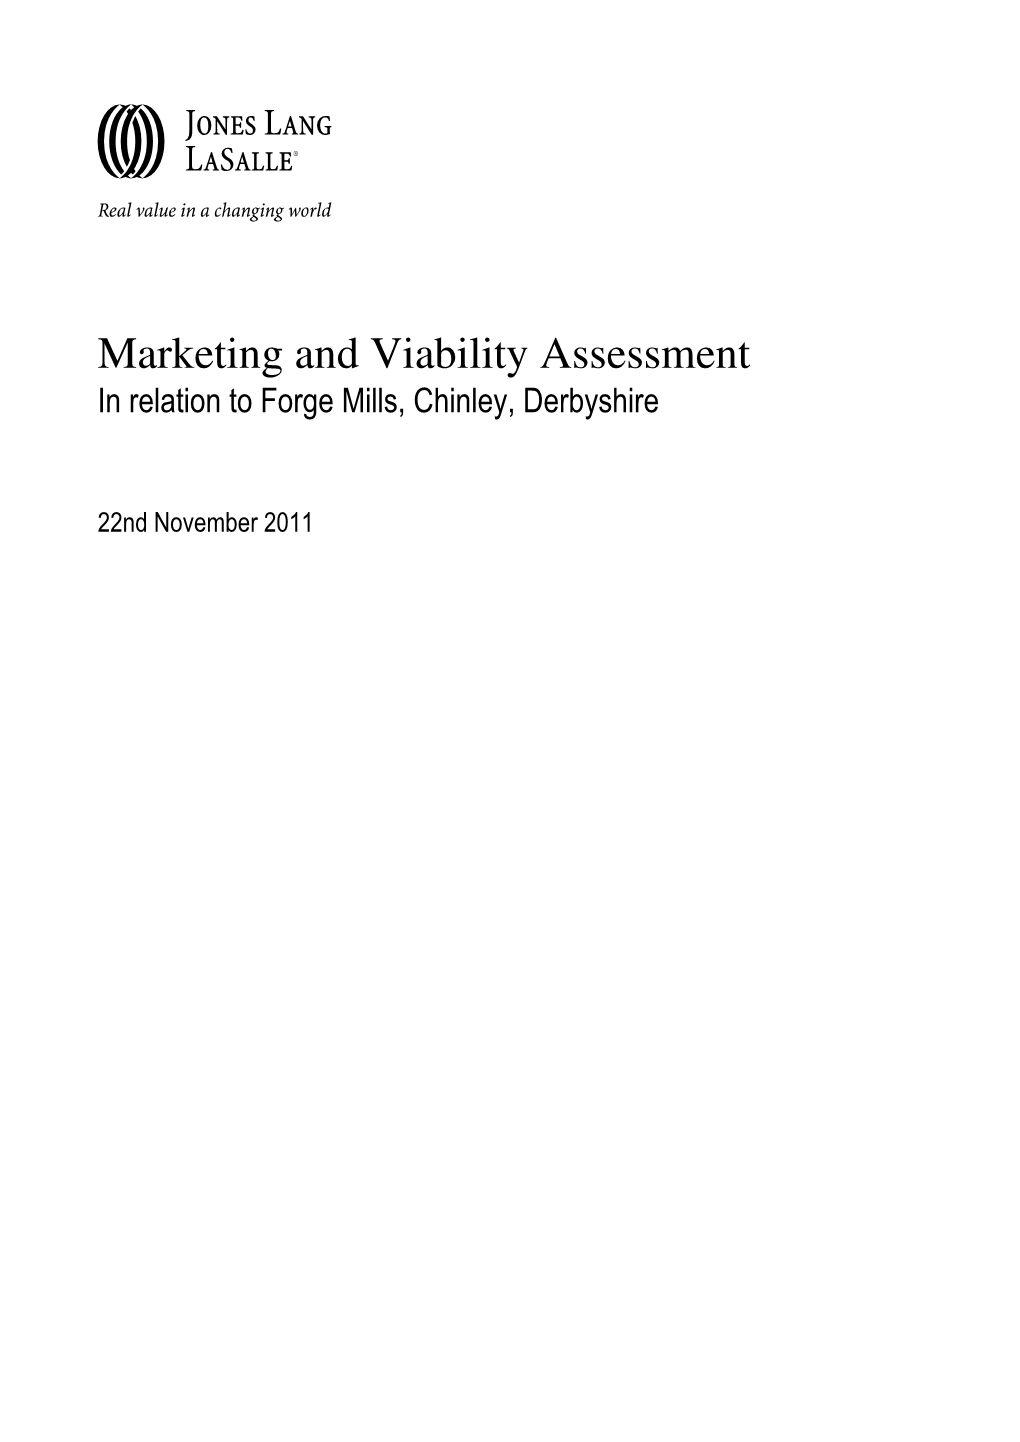 Marketing and Viability Assessment in Relation to Forge Mills, Chinley, Derbyshire